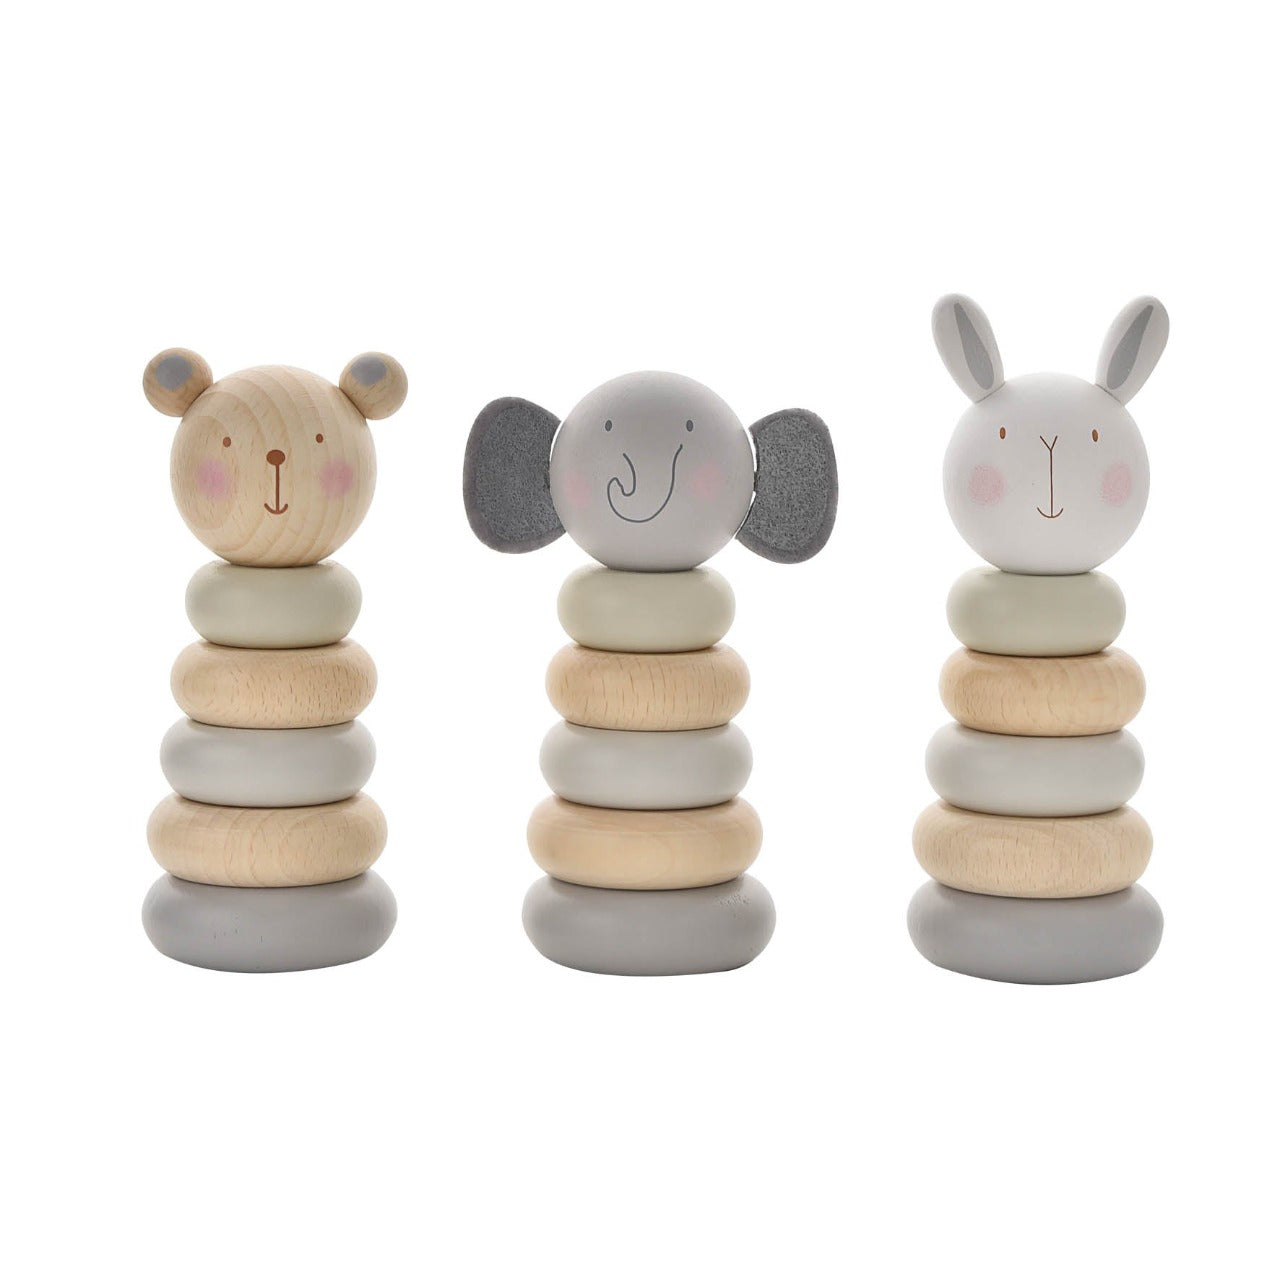 Bambino Wooden Stacking Toy - Bear  Help your little one develop their problem solving and coordination skills with one of these adorable wooden character stacking ring toys. From BAMBINO BY JULIANA® - opening new eyes to a world of wonder.